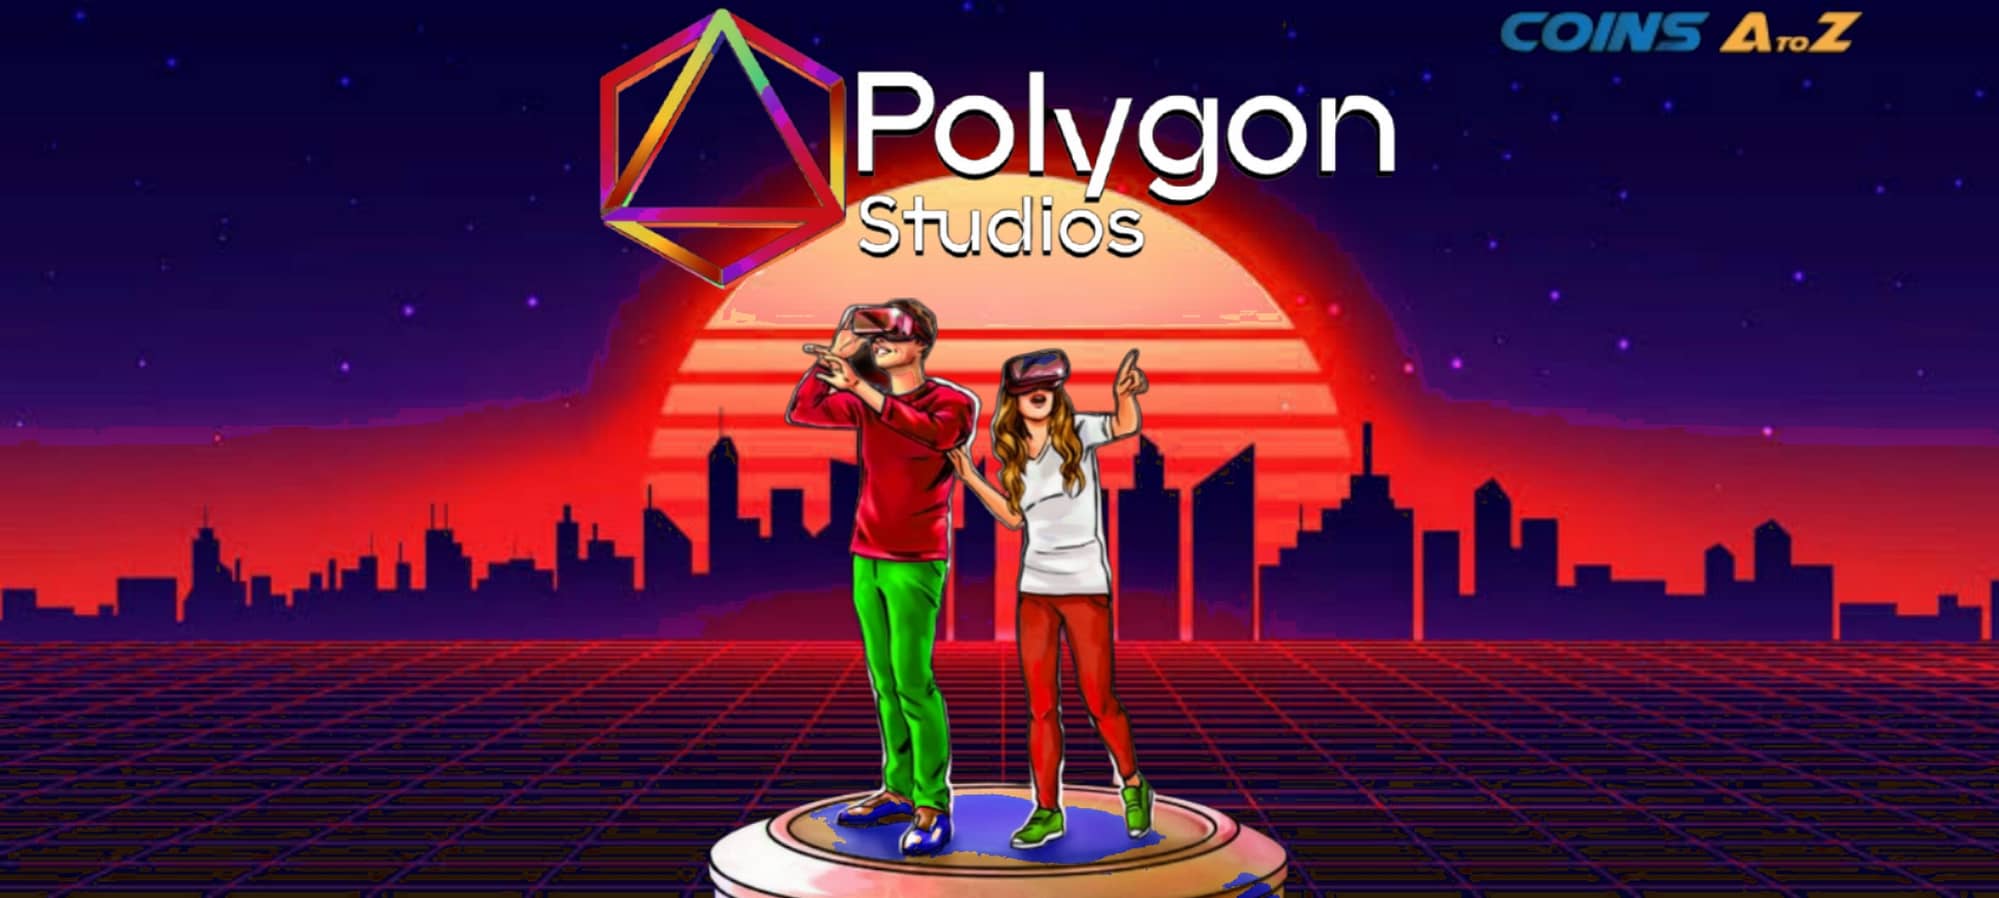 Gaming NFT Market of Twitch Co-Founder expands to Polygon